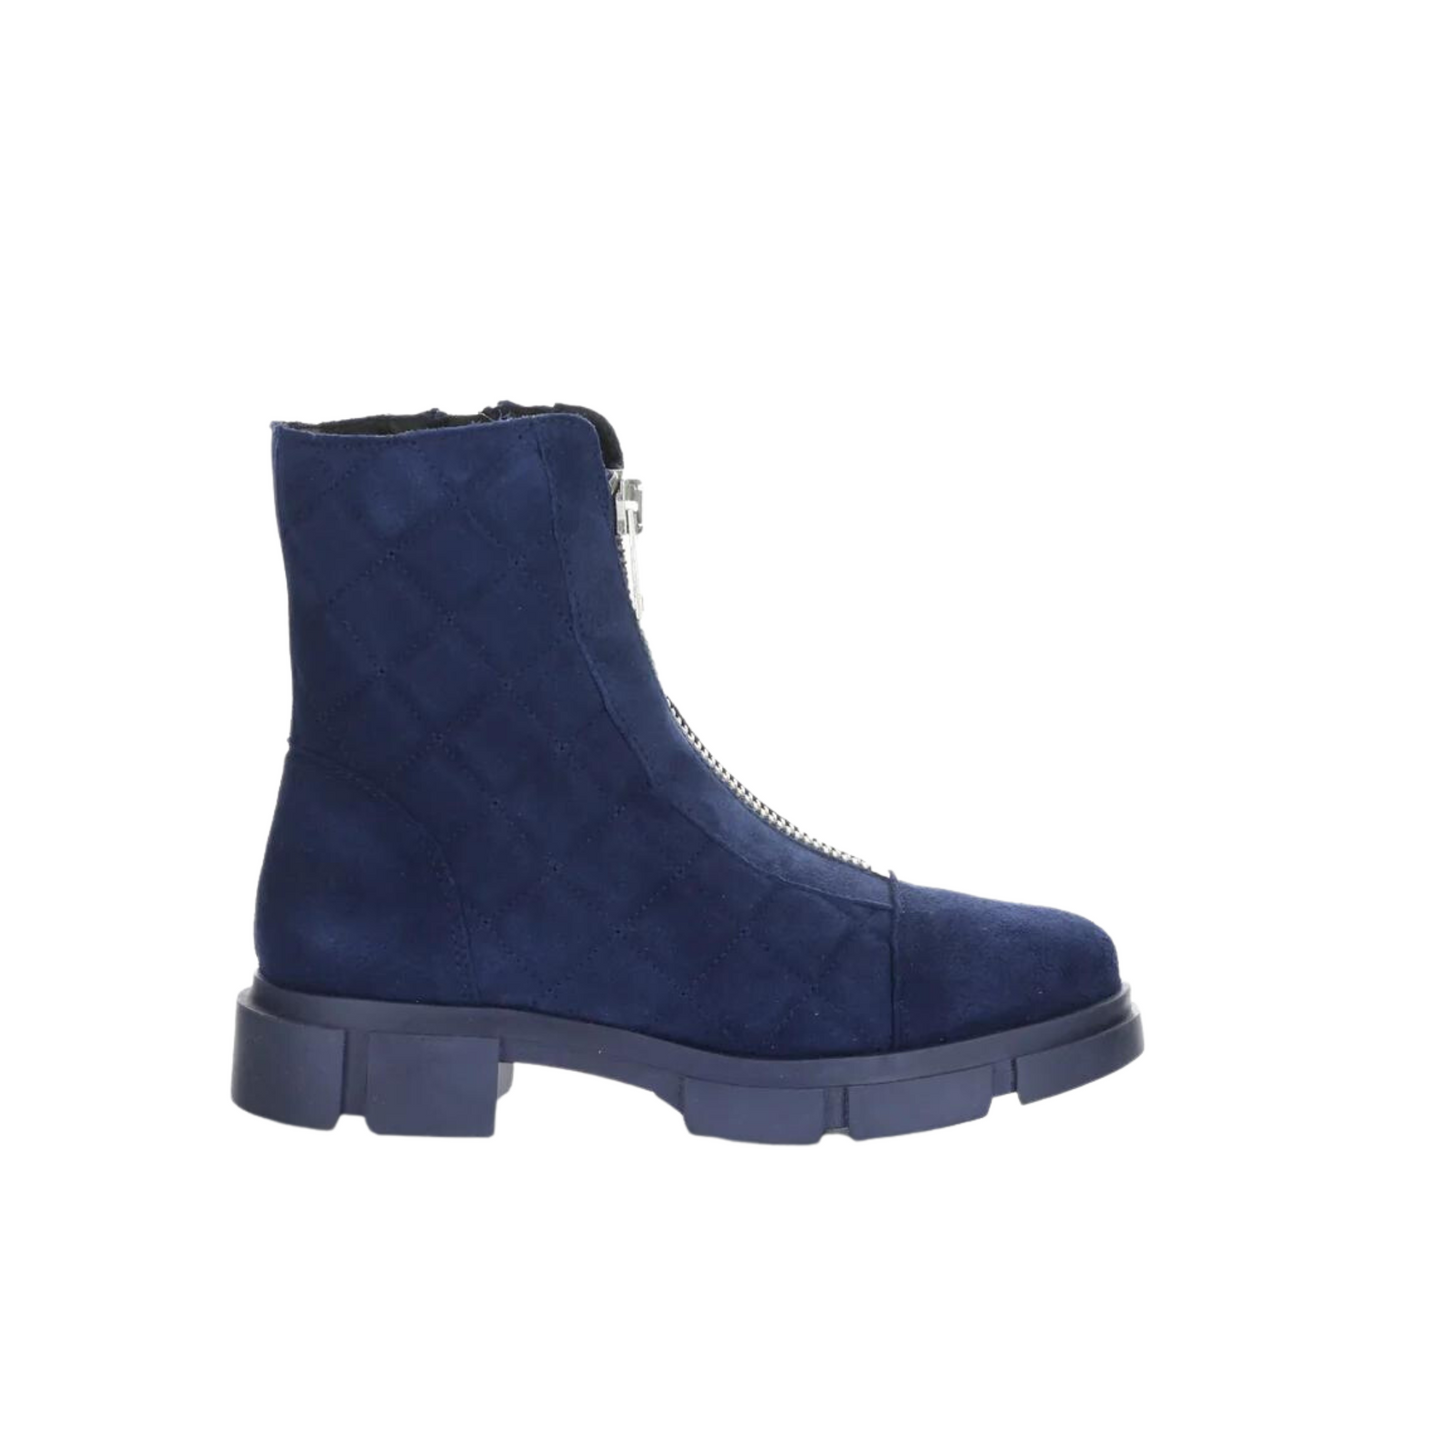 Right side profile of the Bos & Co. Lane Boot in the colour Navy.